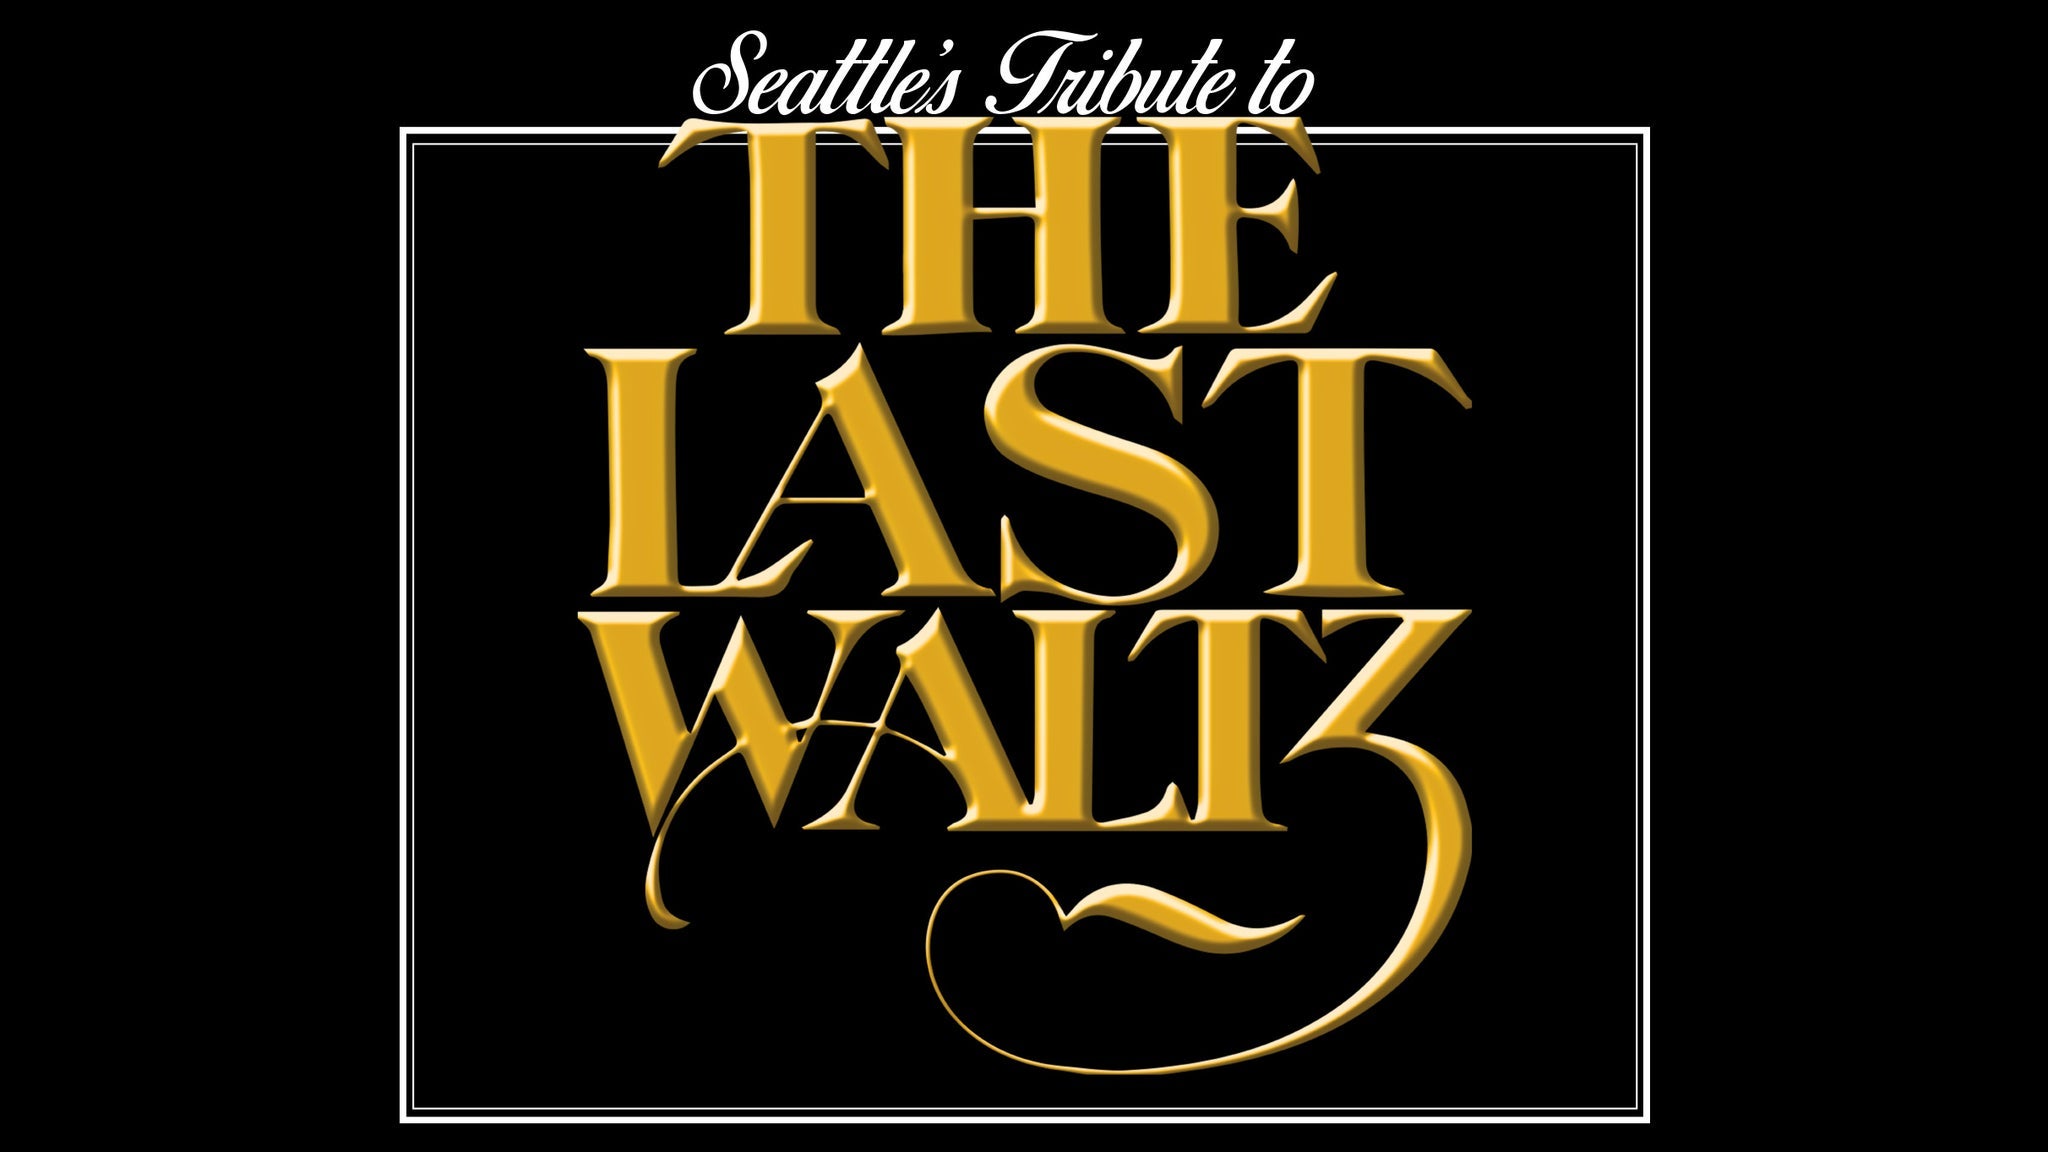 Seattle's Tribute to The Last Waltz at Neptune Theatre